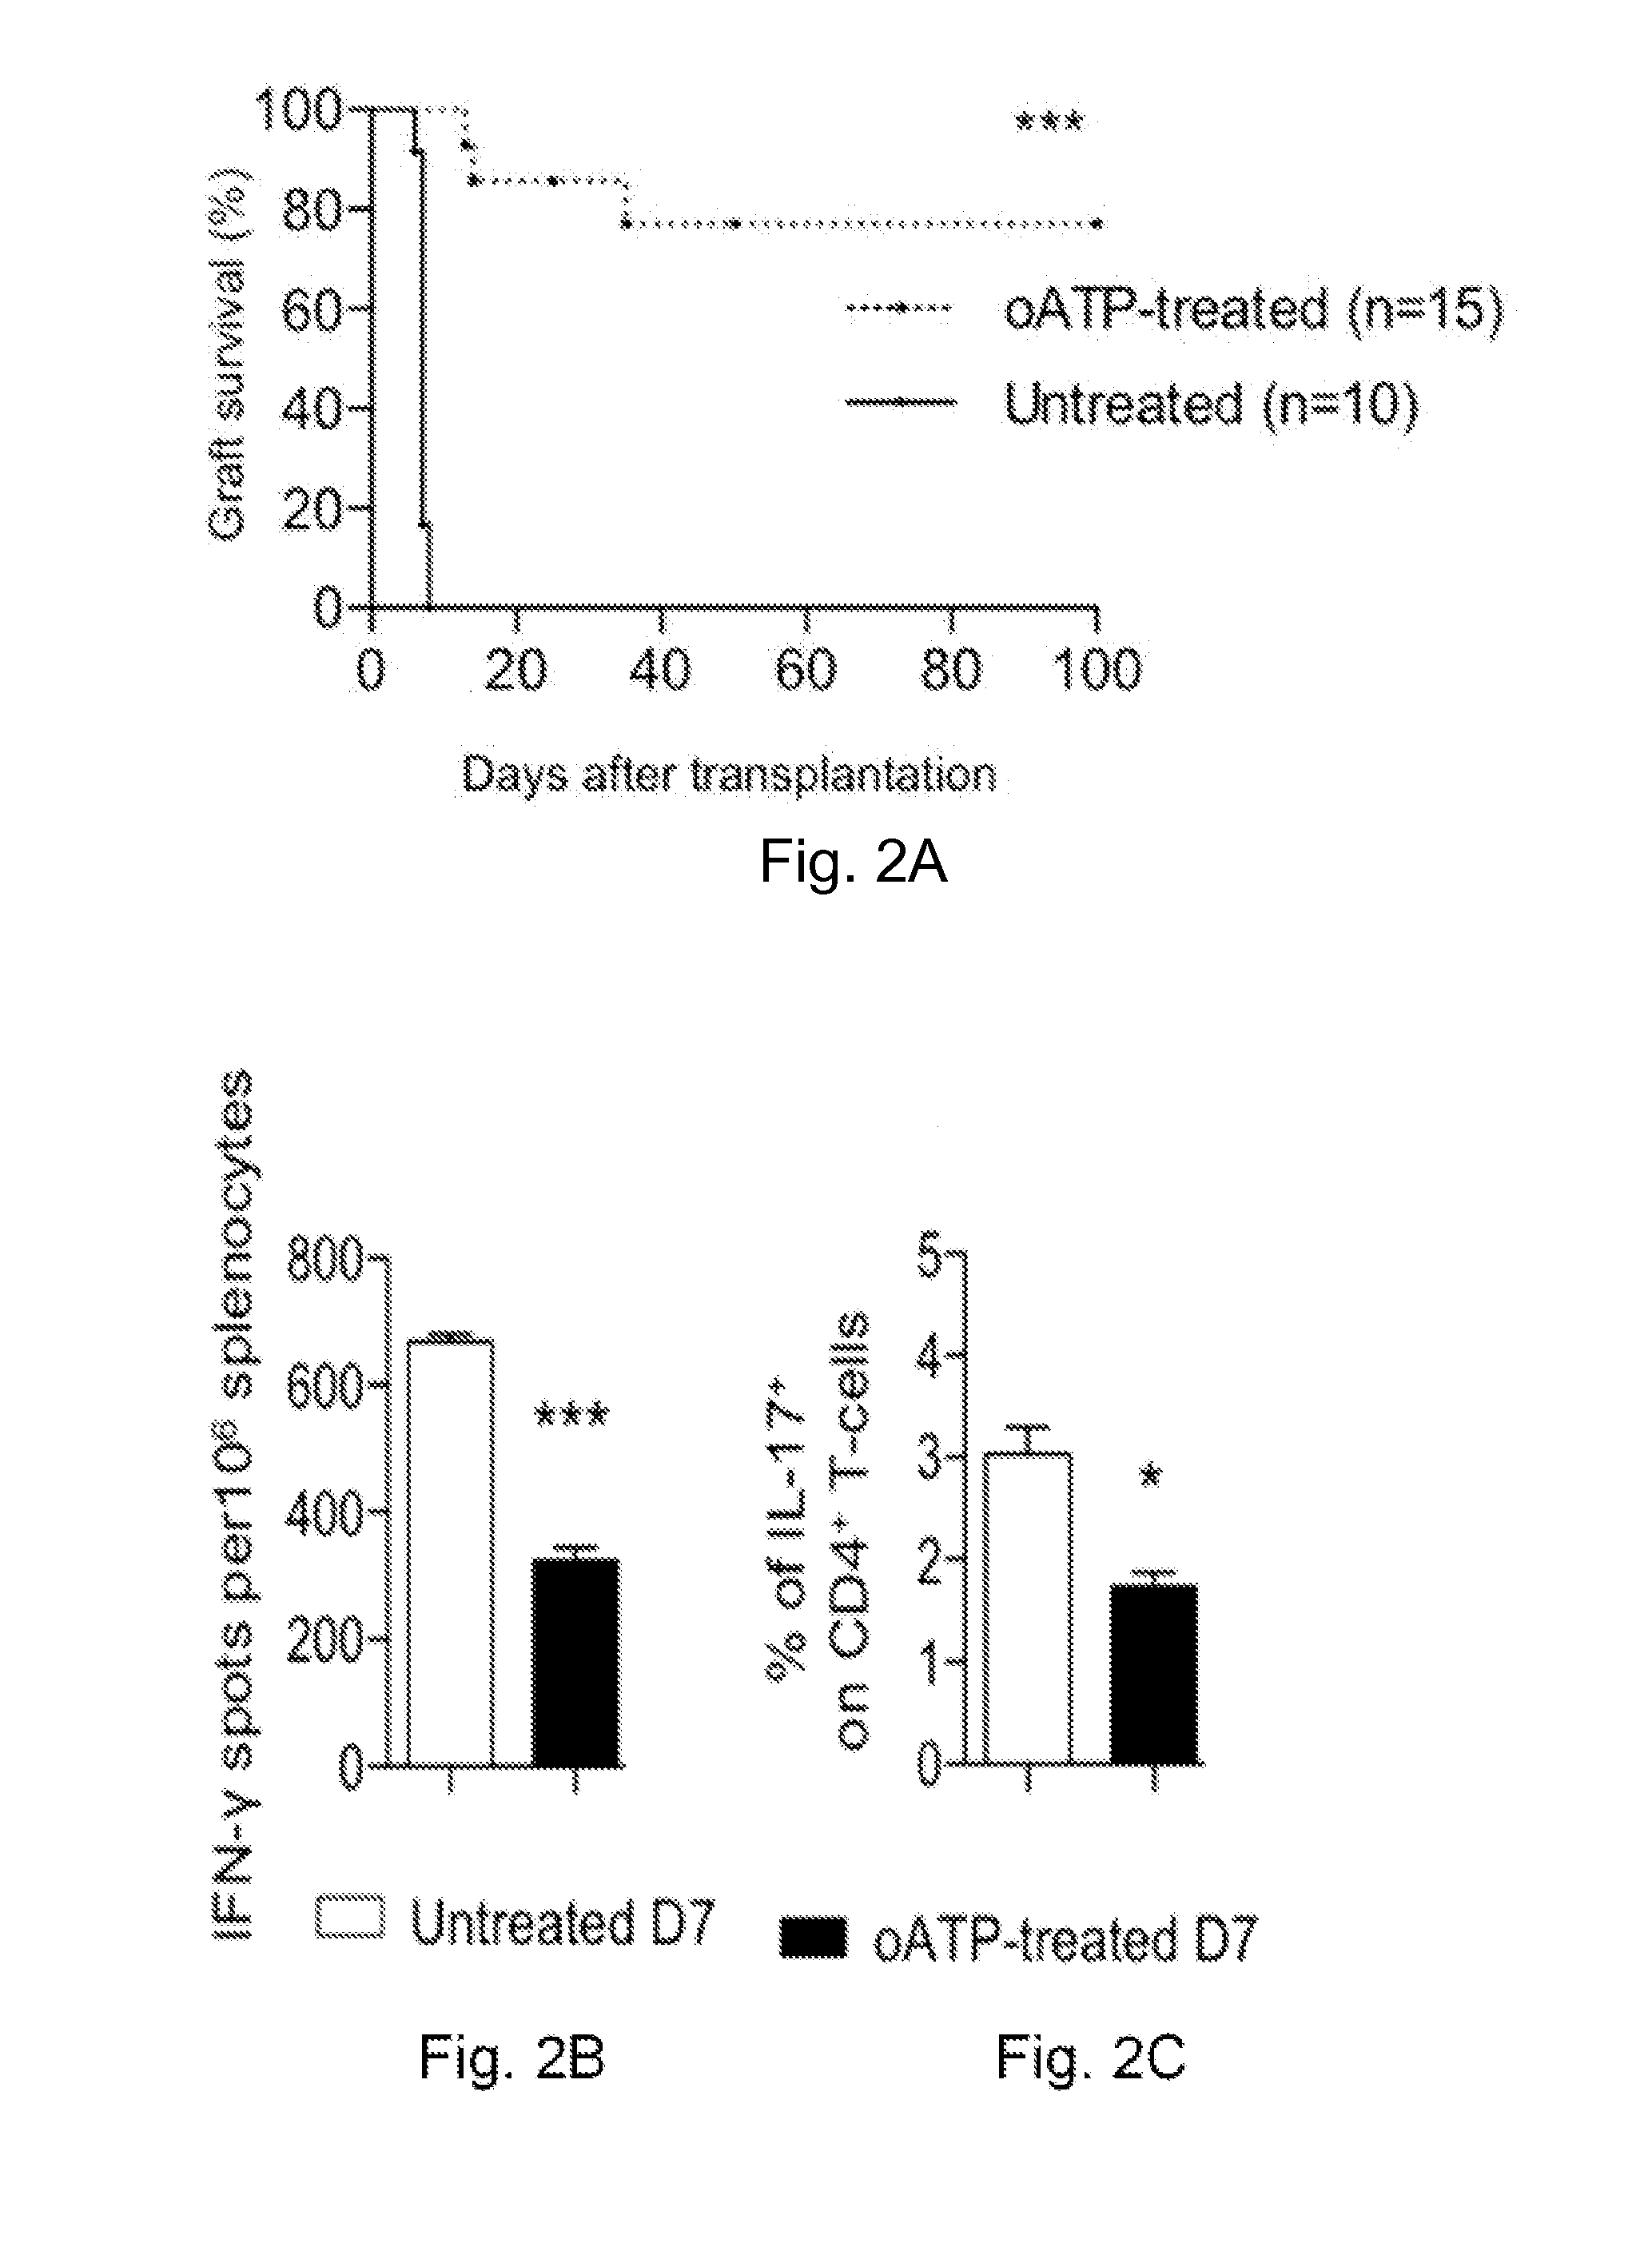 Method of preventing and treating type 1 diabetes, allograft rejection and lung fibrosis (by targeting the atp/p2x7r axis)